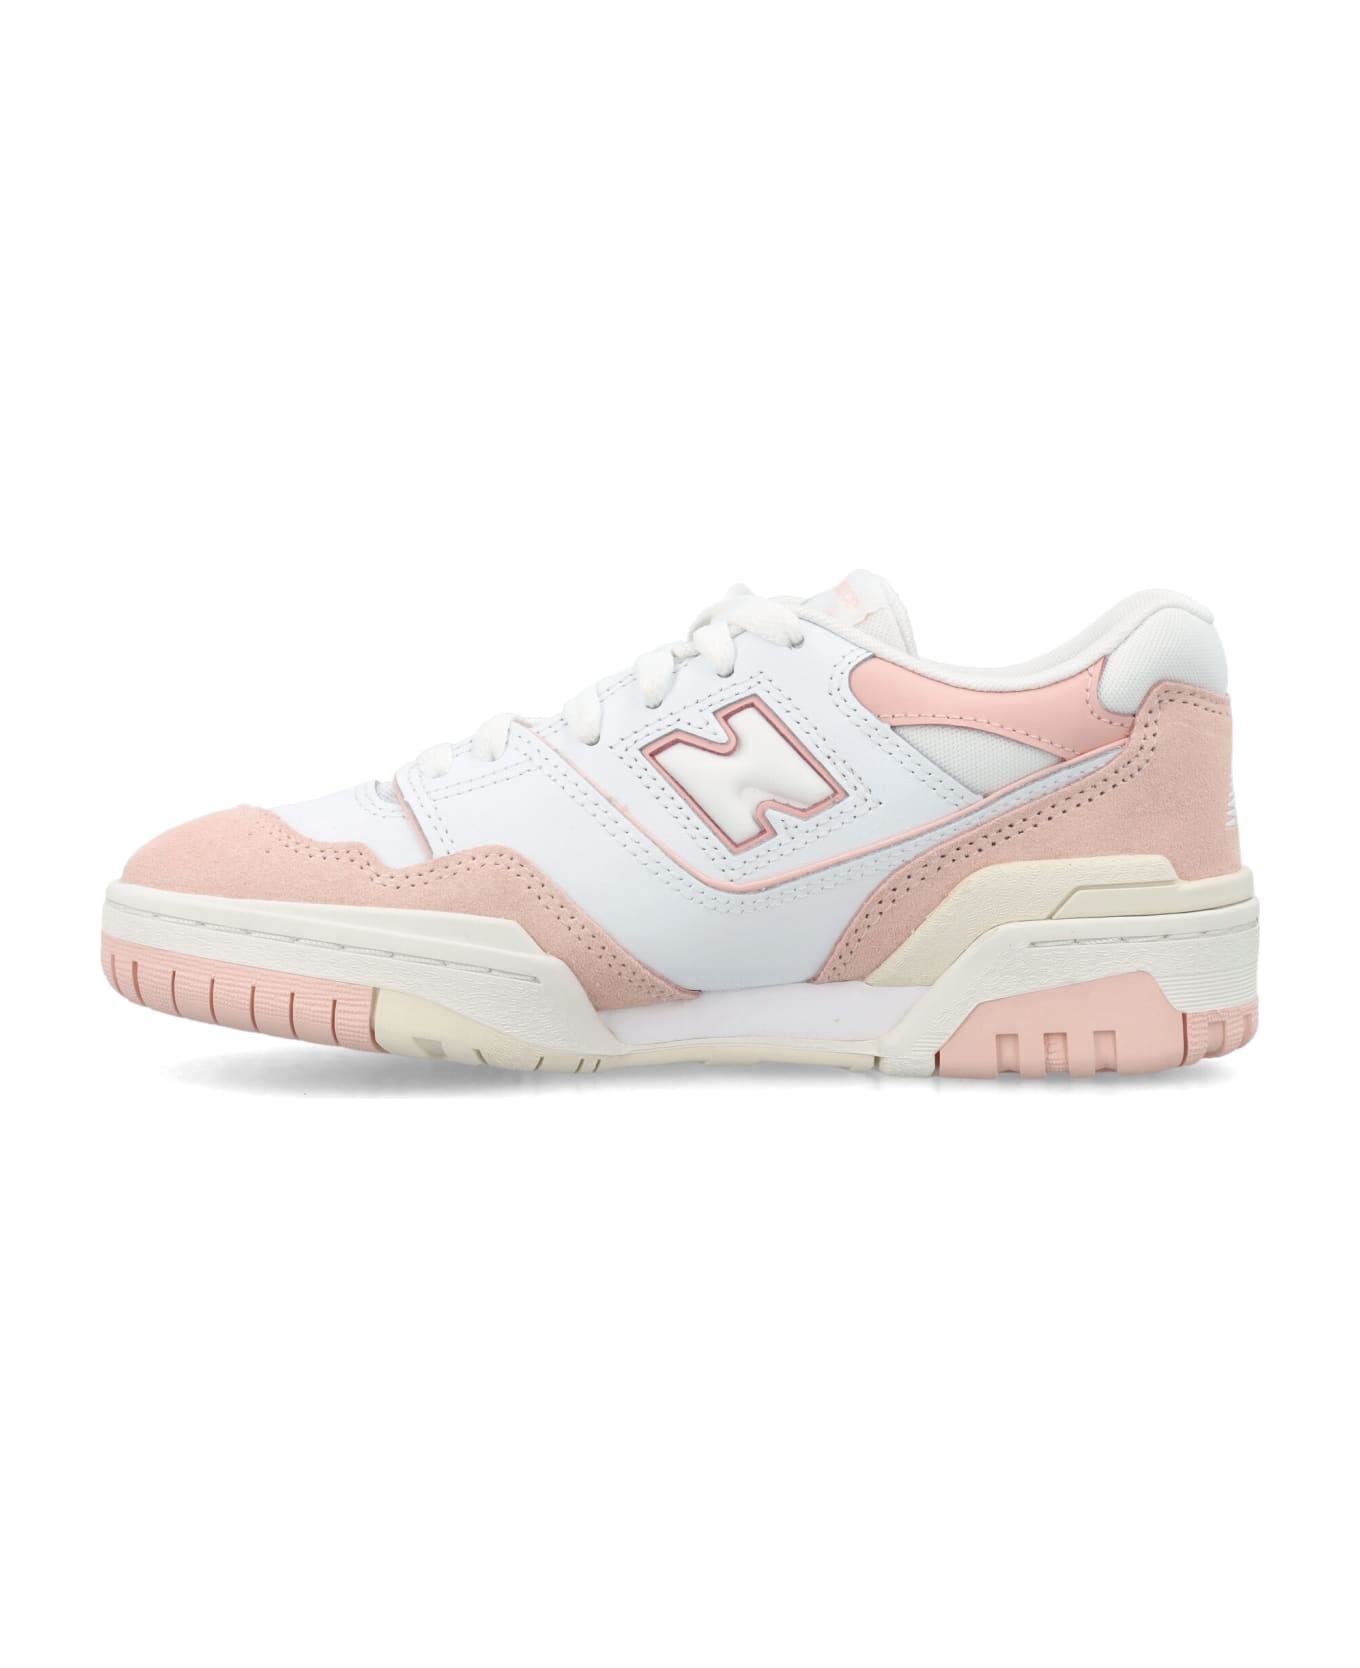 New Balance 550 Sneakers - ROSE/WHITE